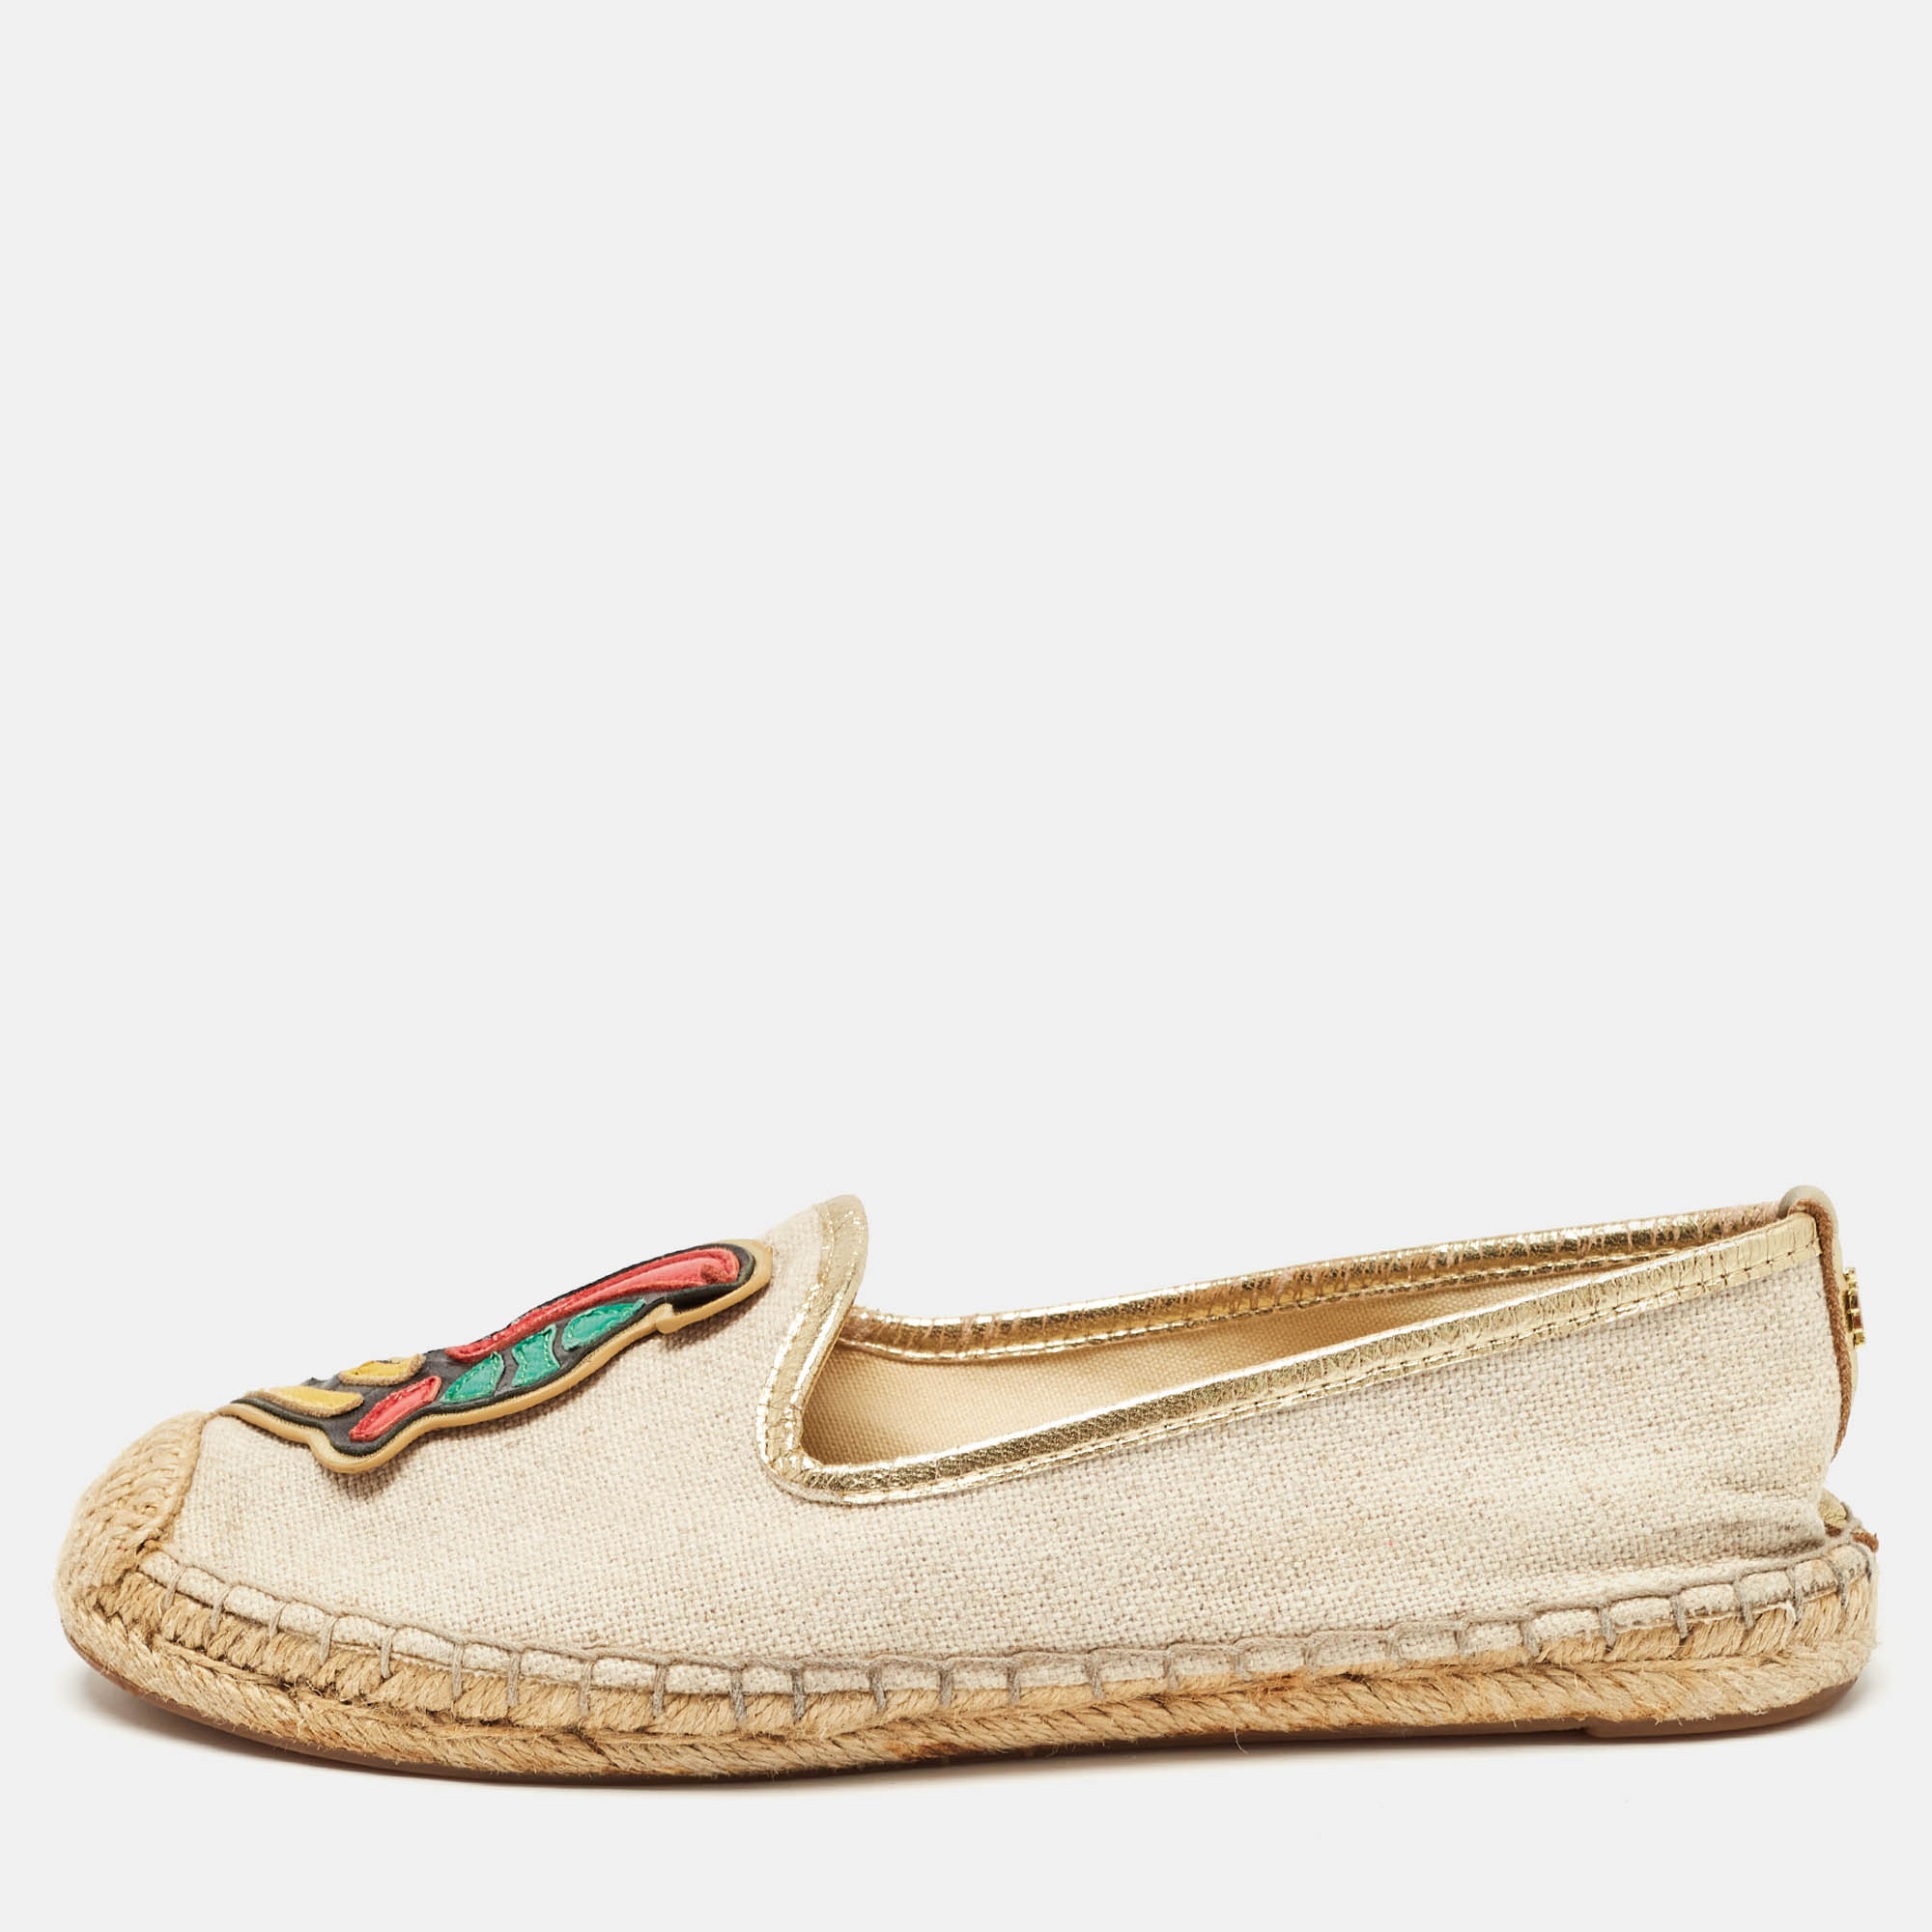 

Tory Burch Beige/Gold Canvas and Leather Trim Slip On Espadrille Flats Size